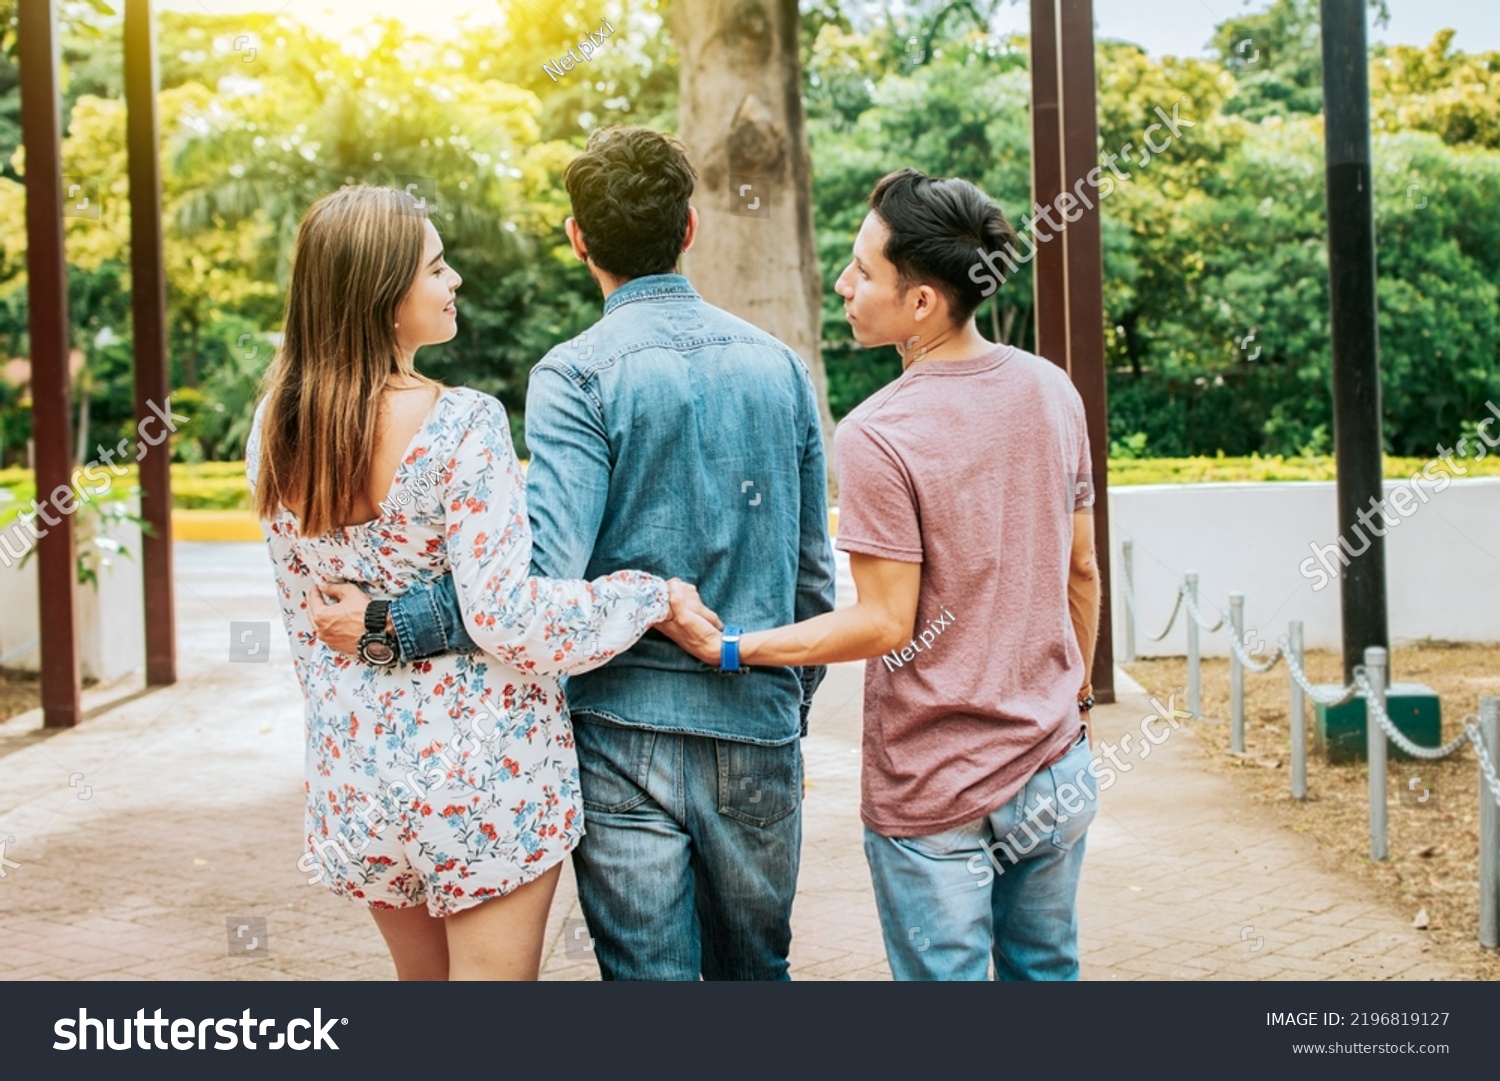 Unfaithful girl walking in the park with her boyfriend while holding another man hand. Love triangle concept. Woman holding hands with another man while walking with her boyfriend outdoor #2196819127